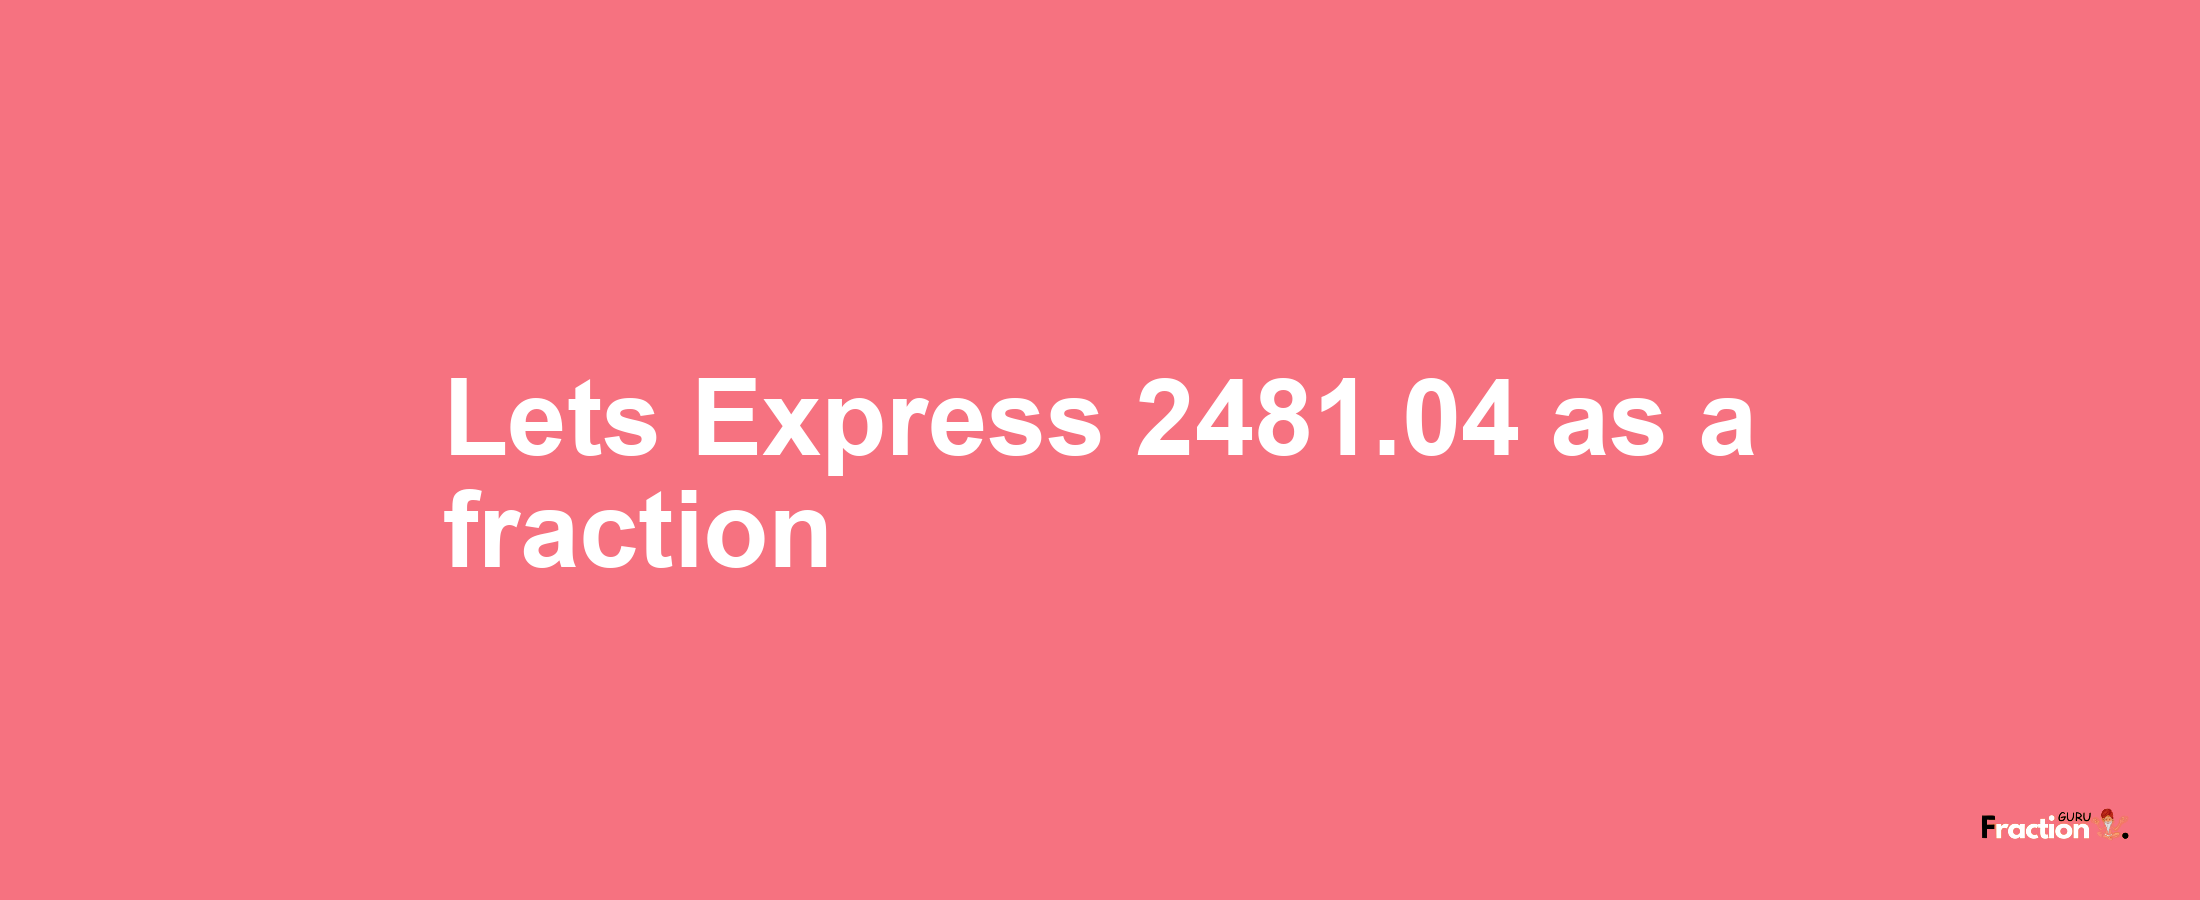 Lets Express 2481.04 as afraction